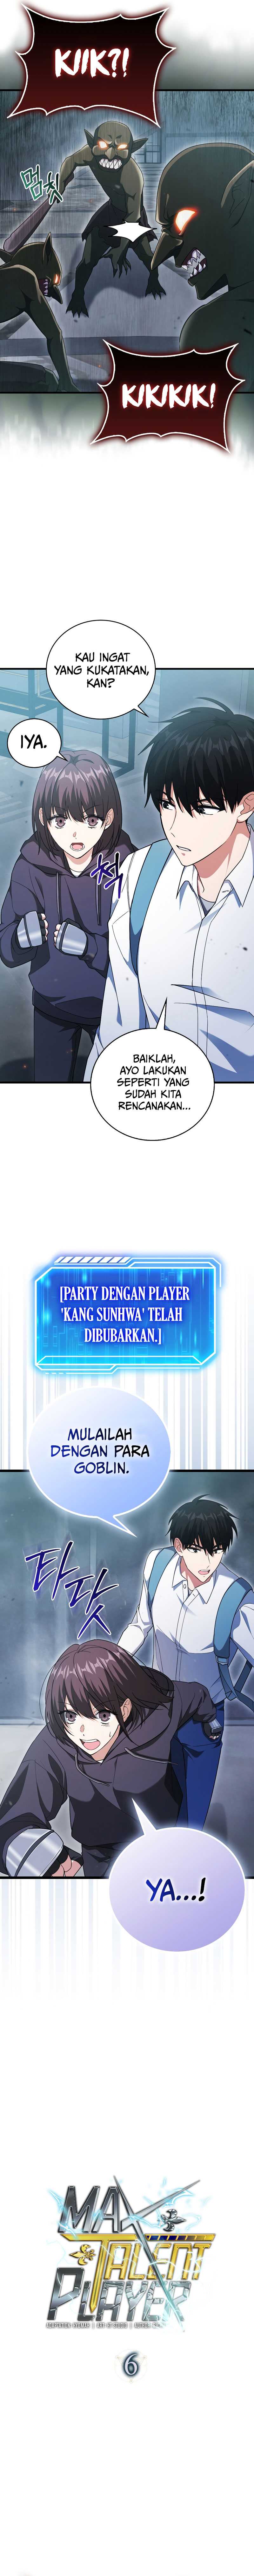 Max Talent Player Chapter 06